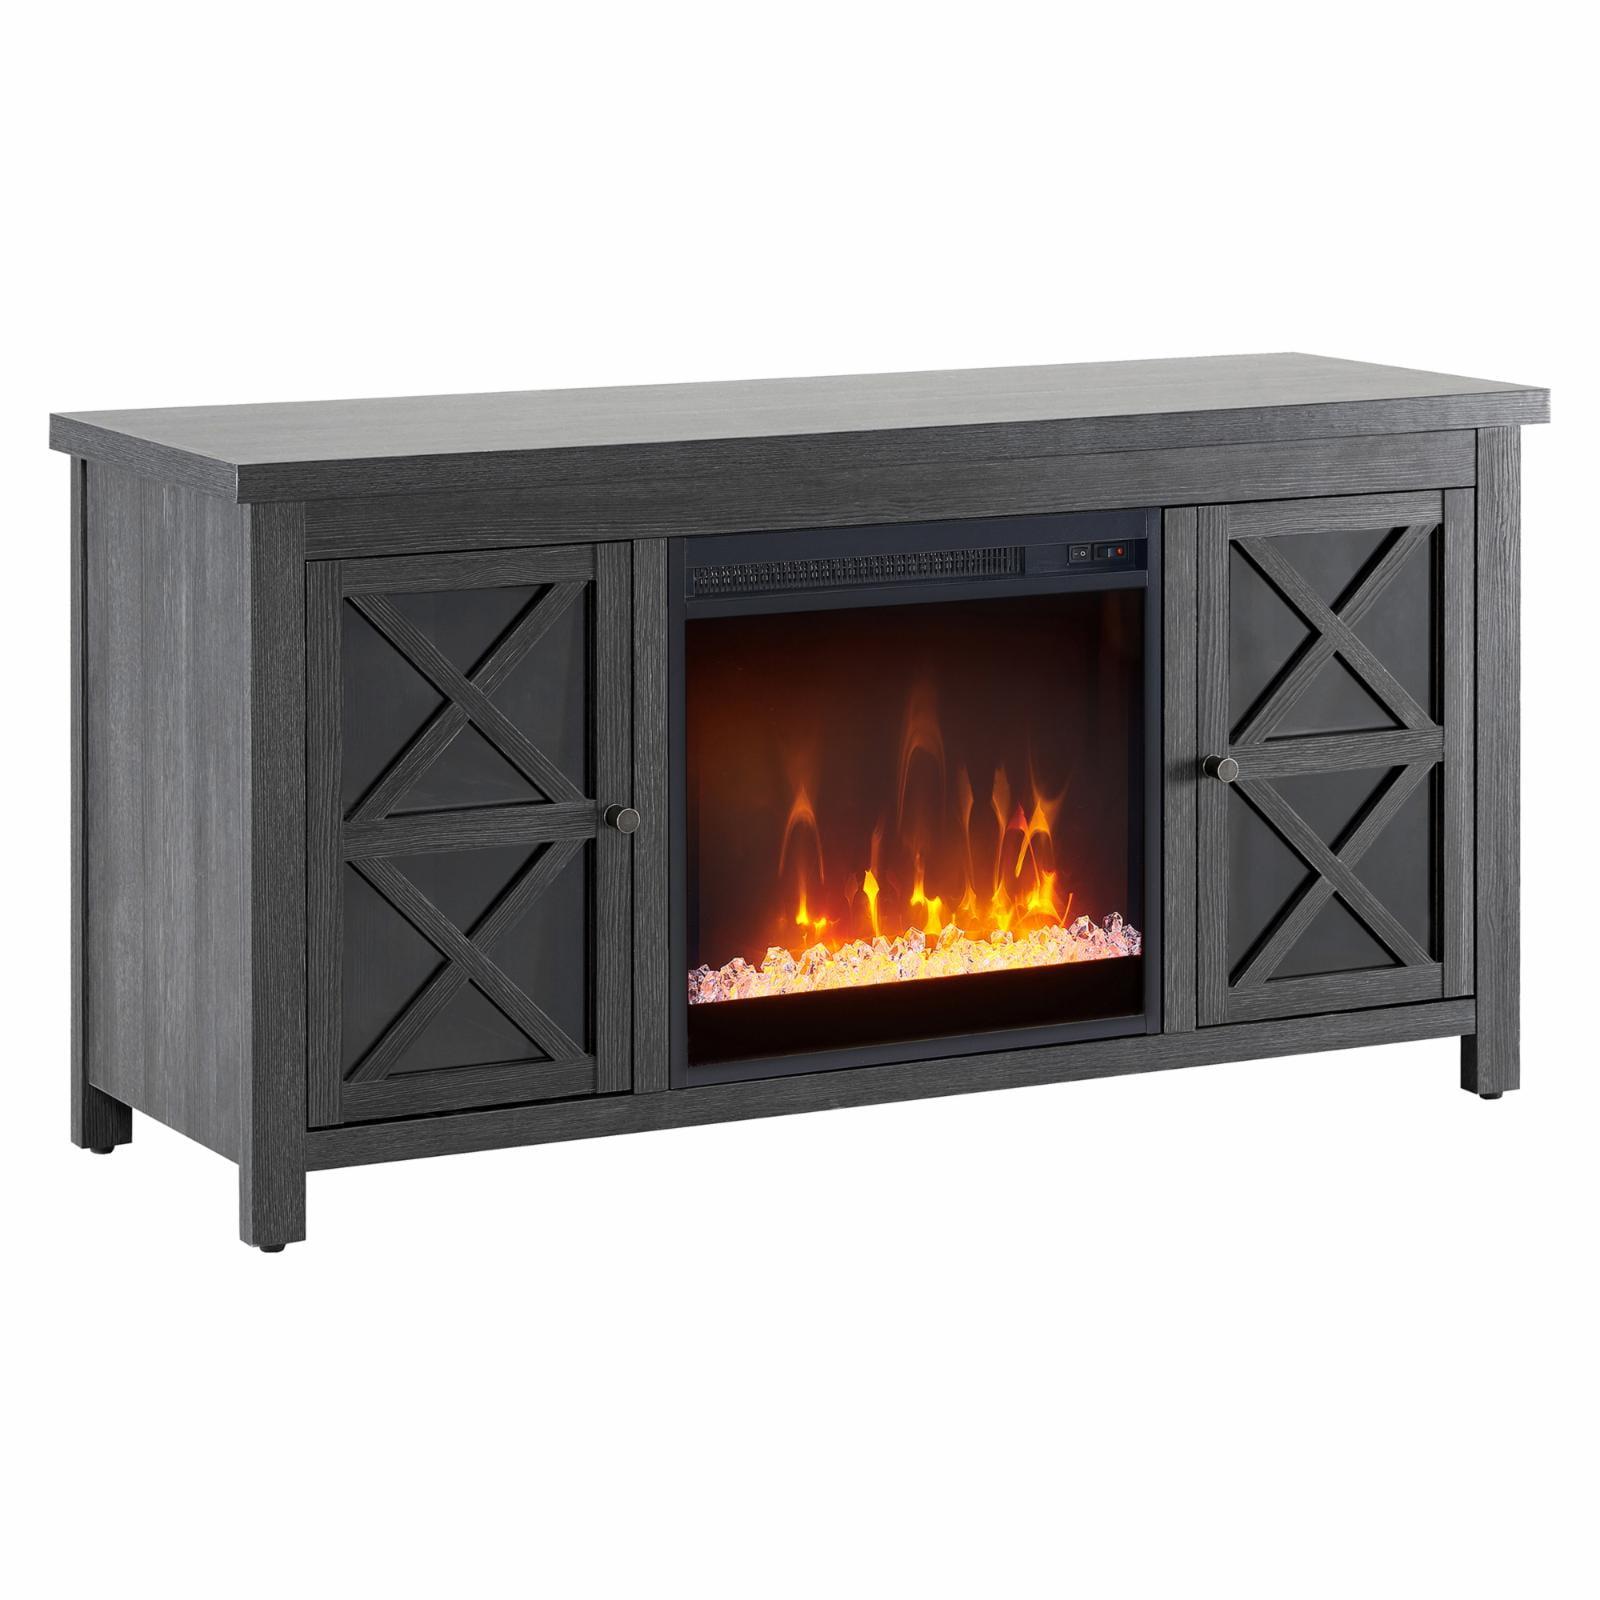 Colton 55" Charcoal Gray Metal TV Stand with Crystal Fireplace and Cabinet